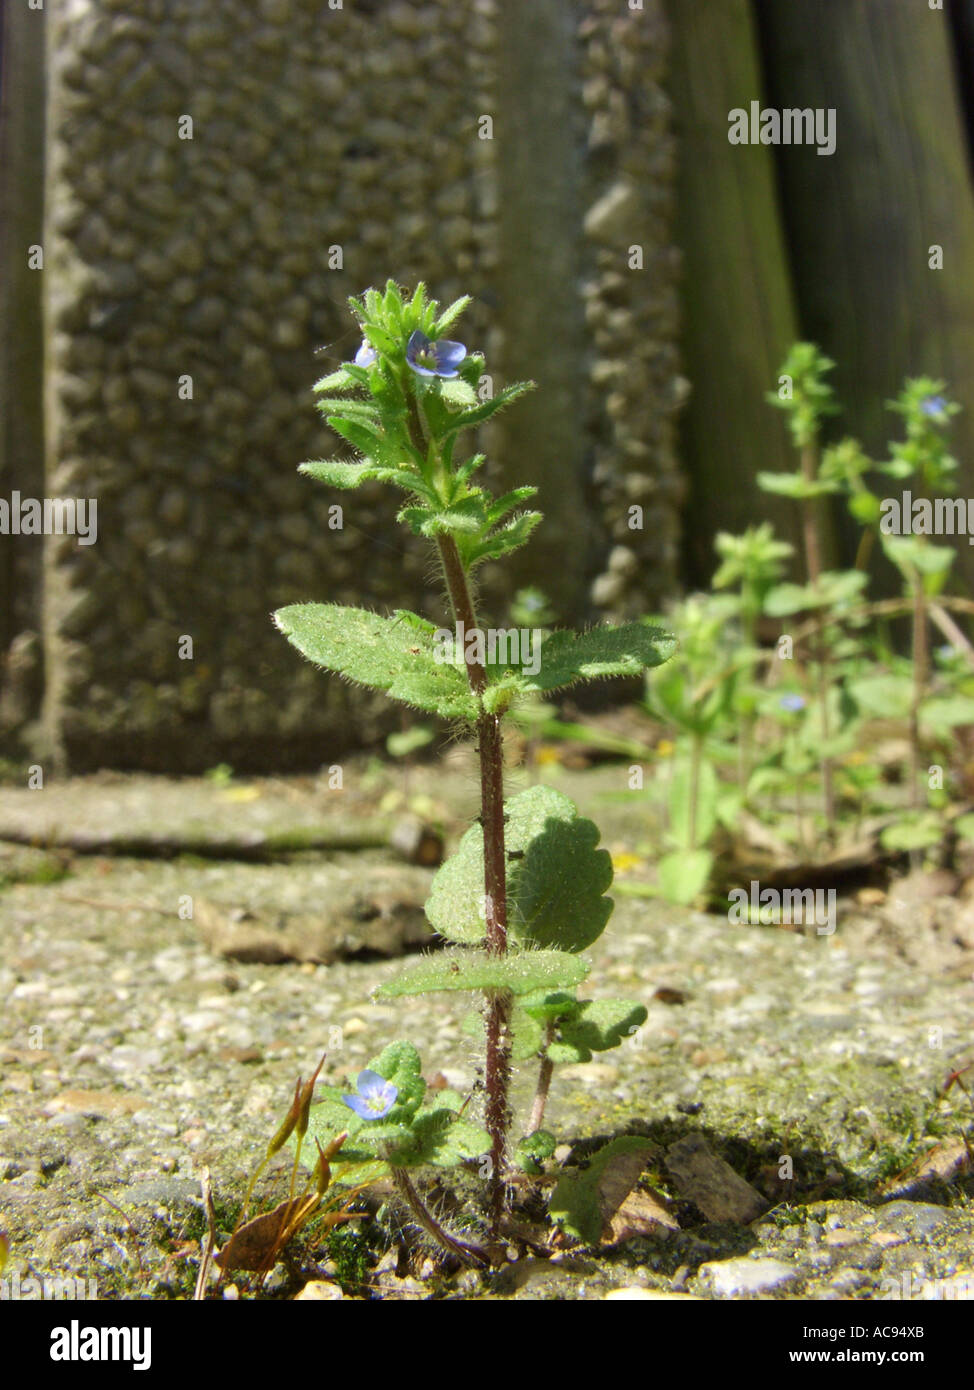 common speedwell, corn speedwell, wall speedwell (Veronica arvensis), flowering plant on a pavement Stock Photo